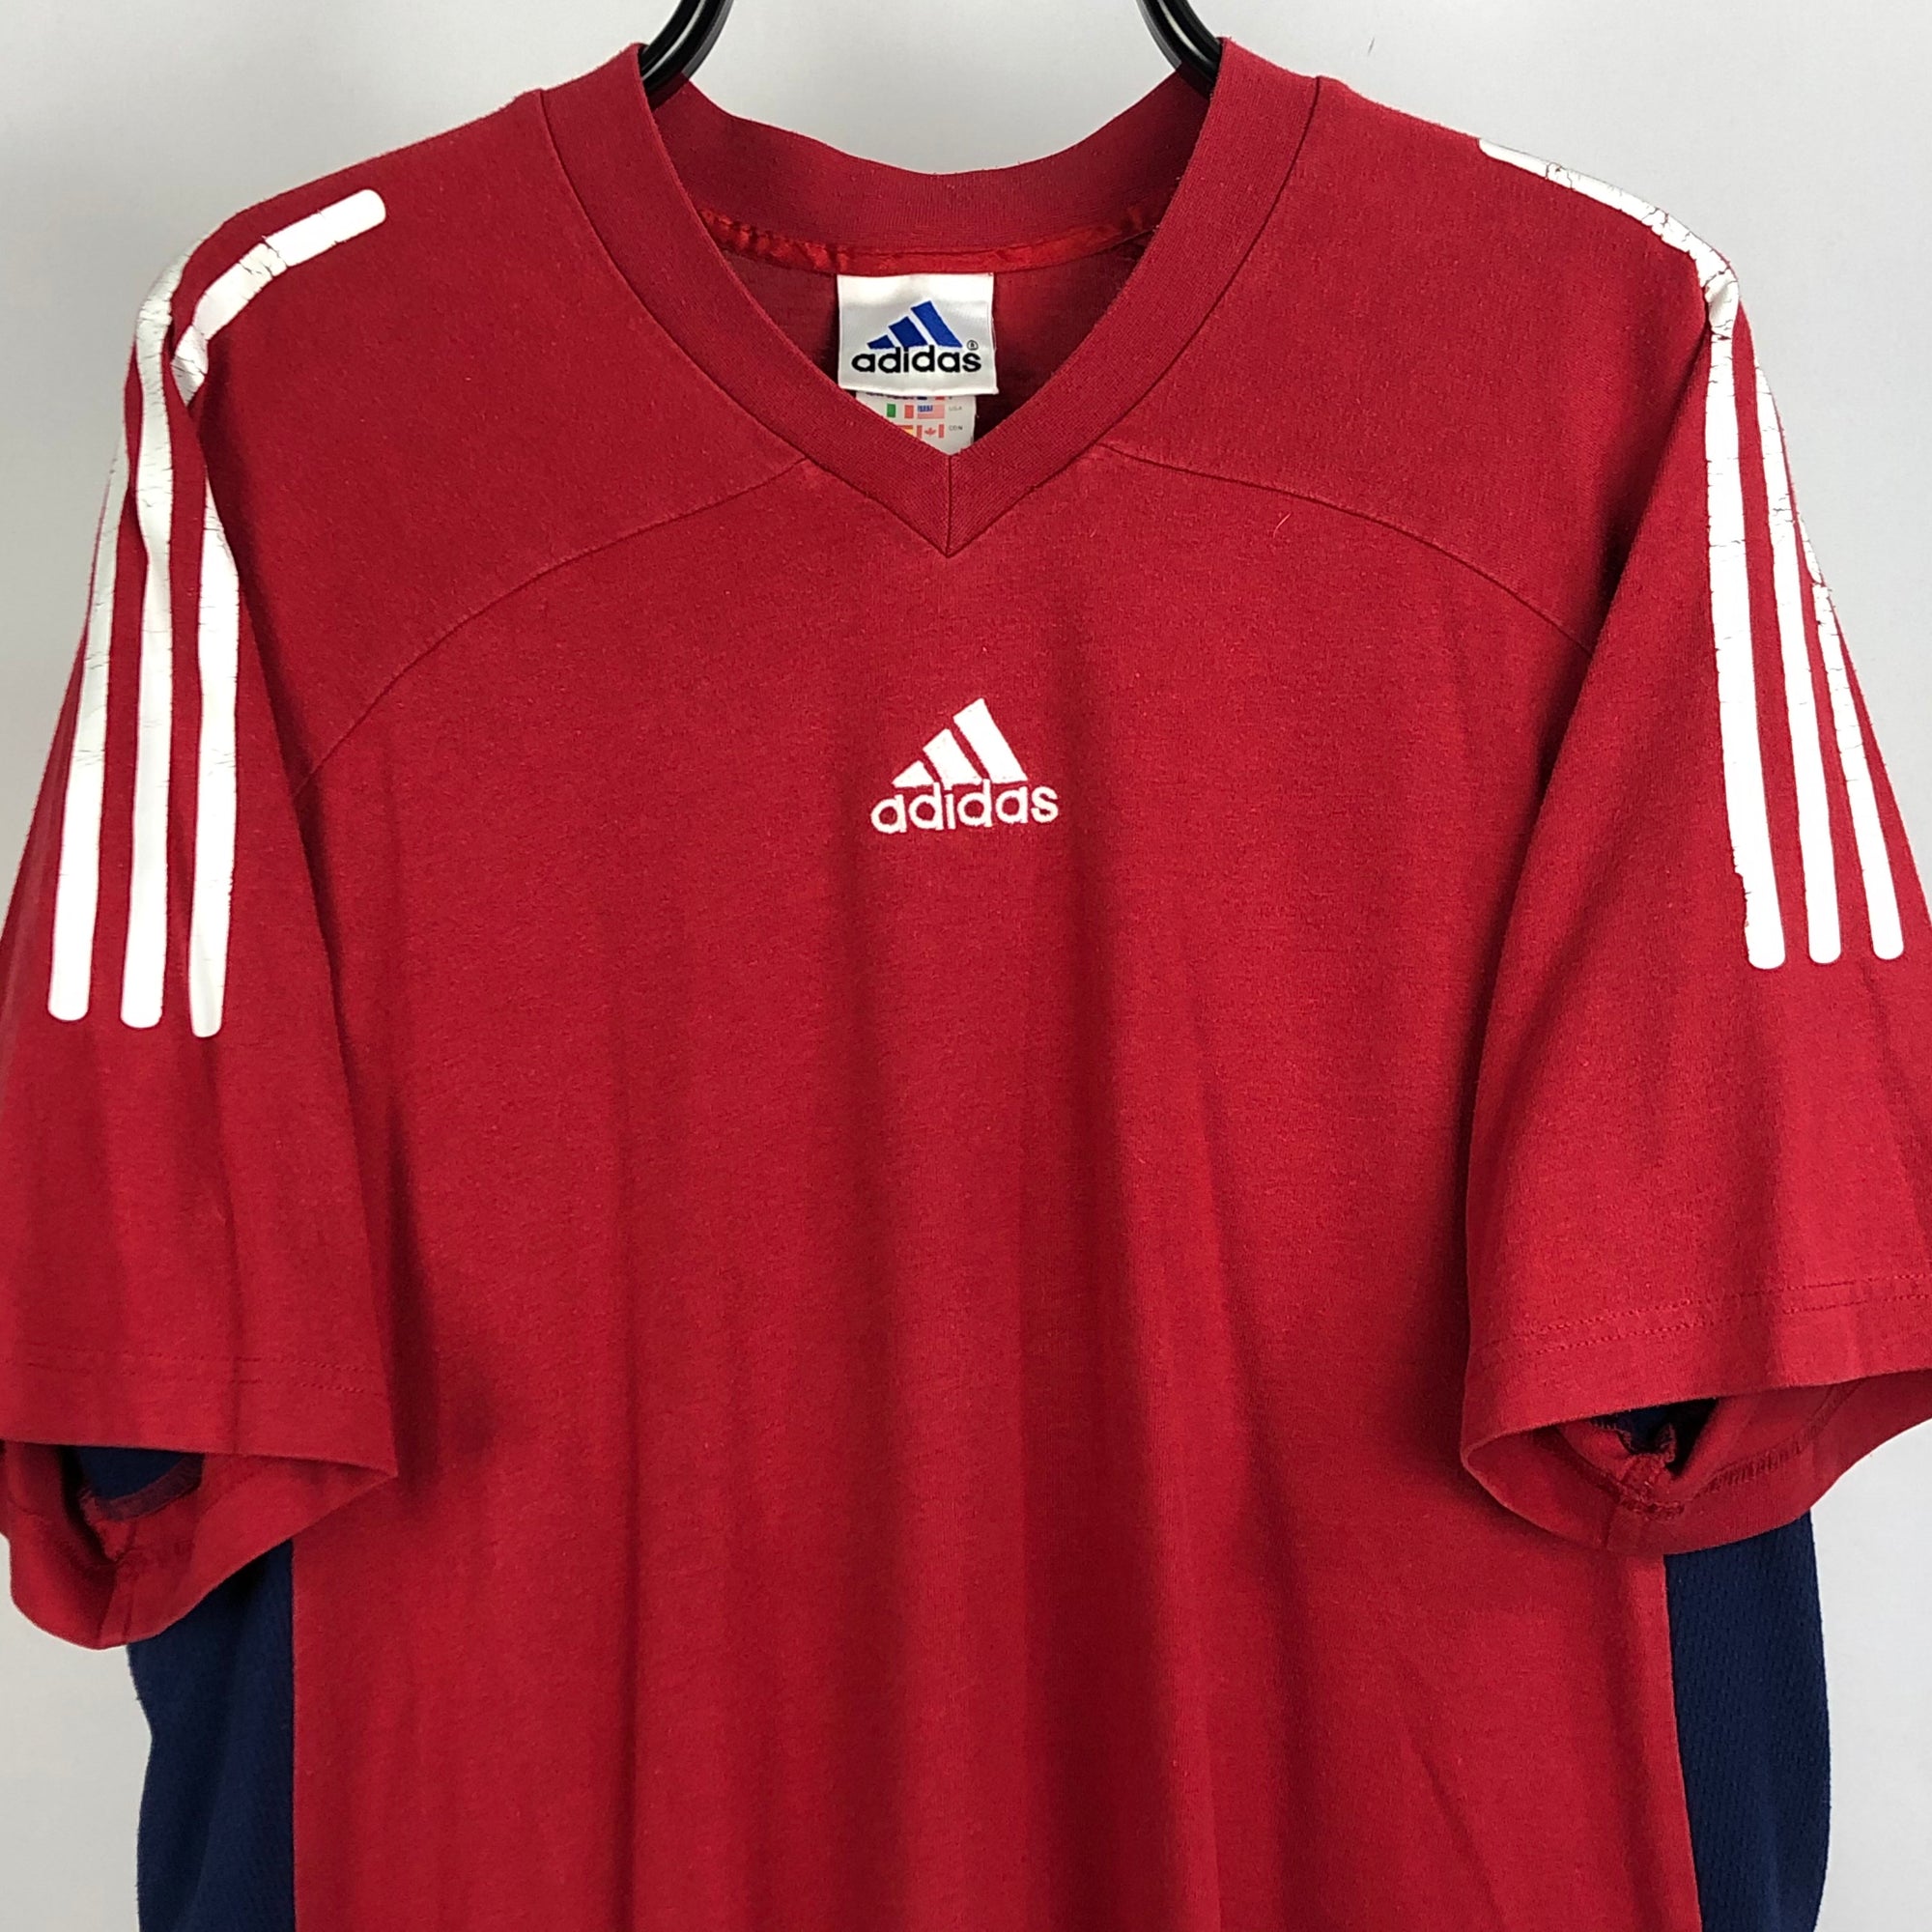 Vintage Adidas Embroidered Centre Logo Tee - Men's Large/Women's XL